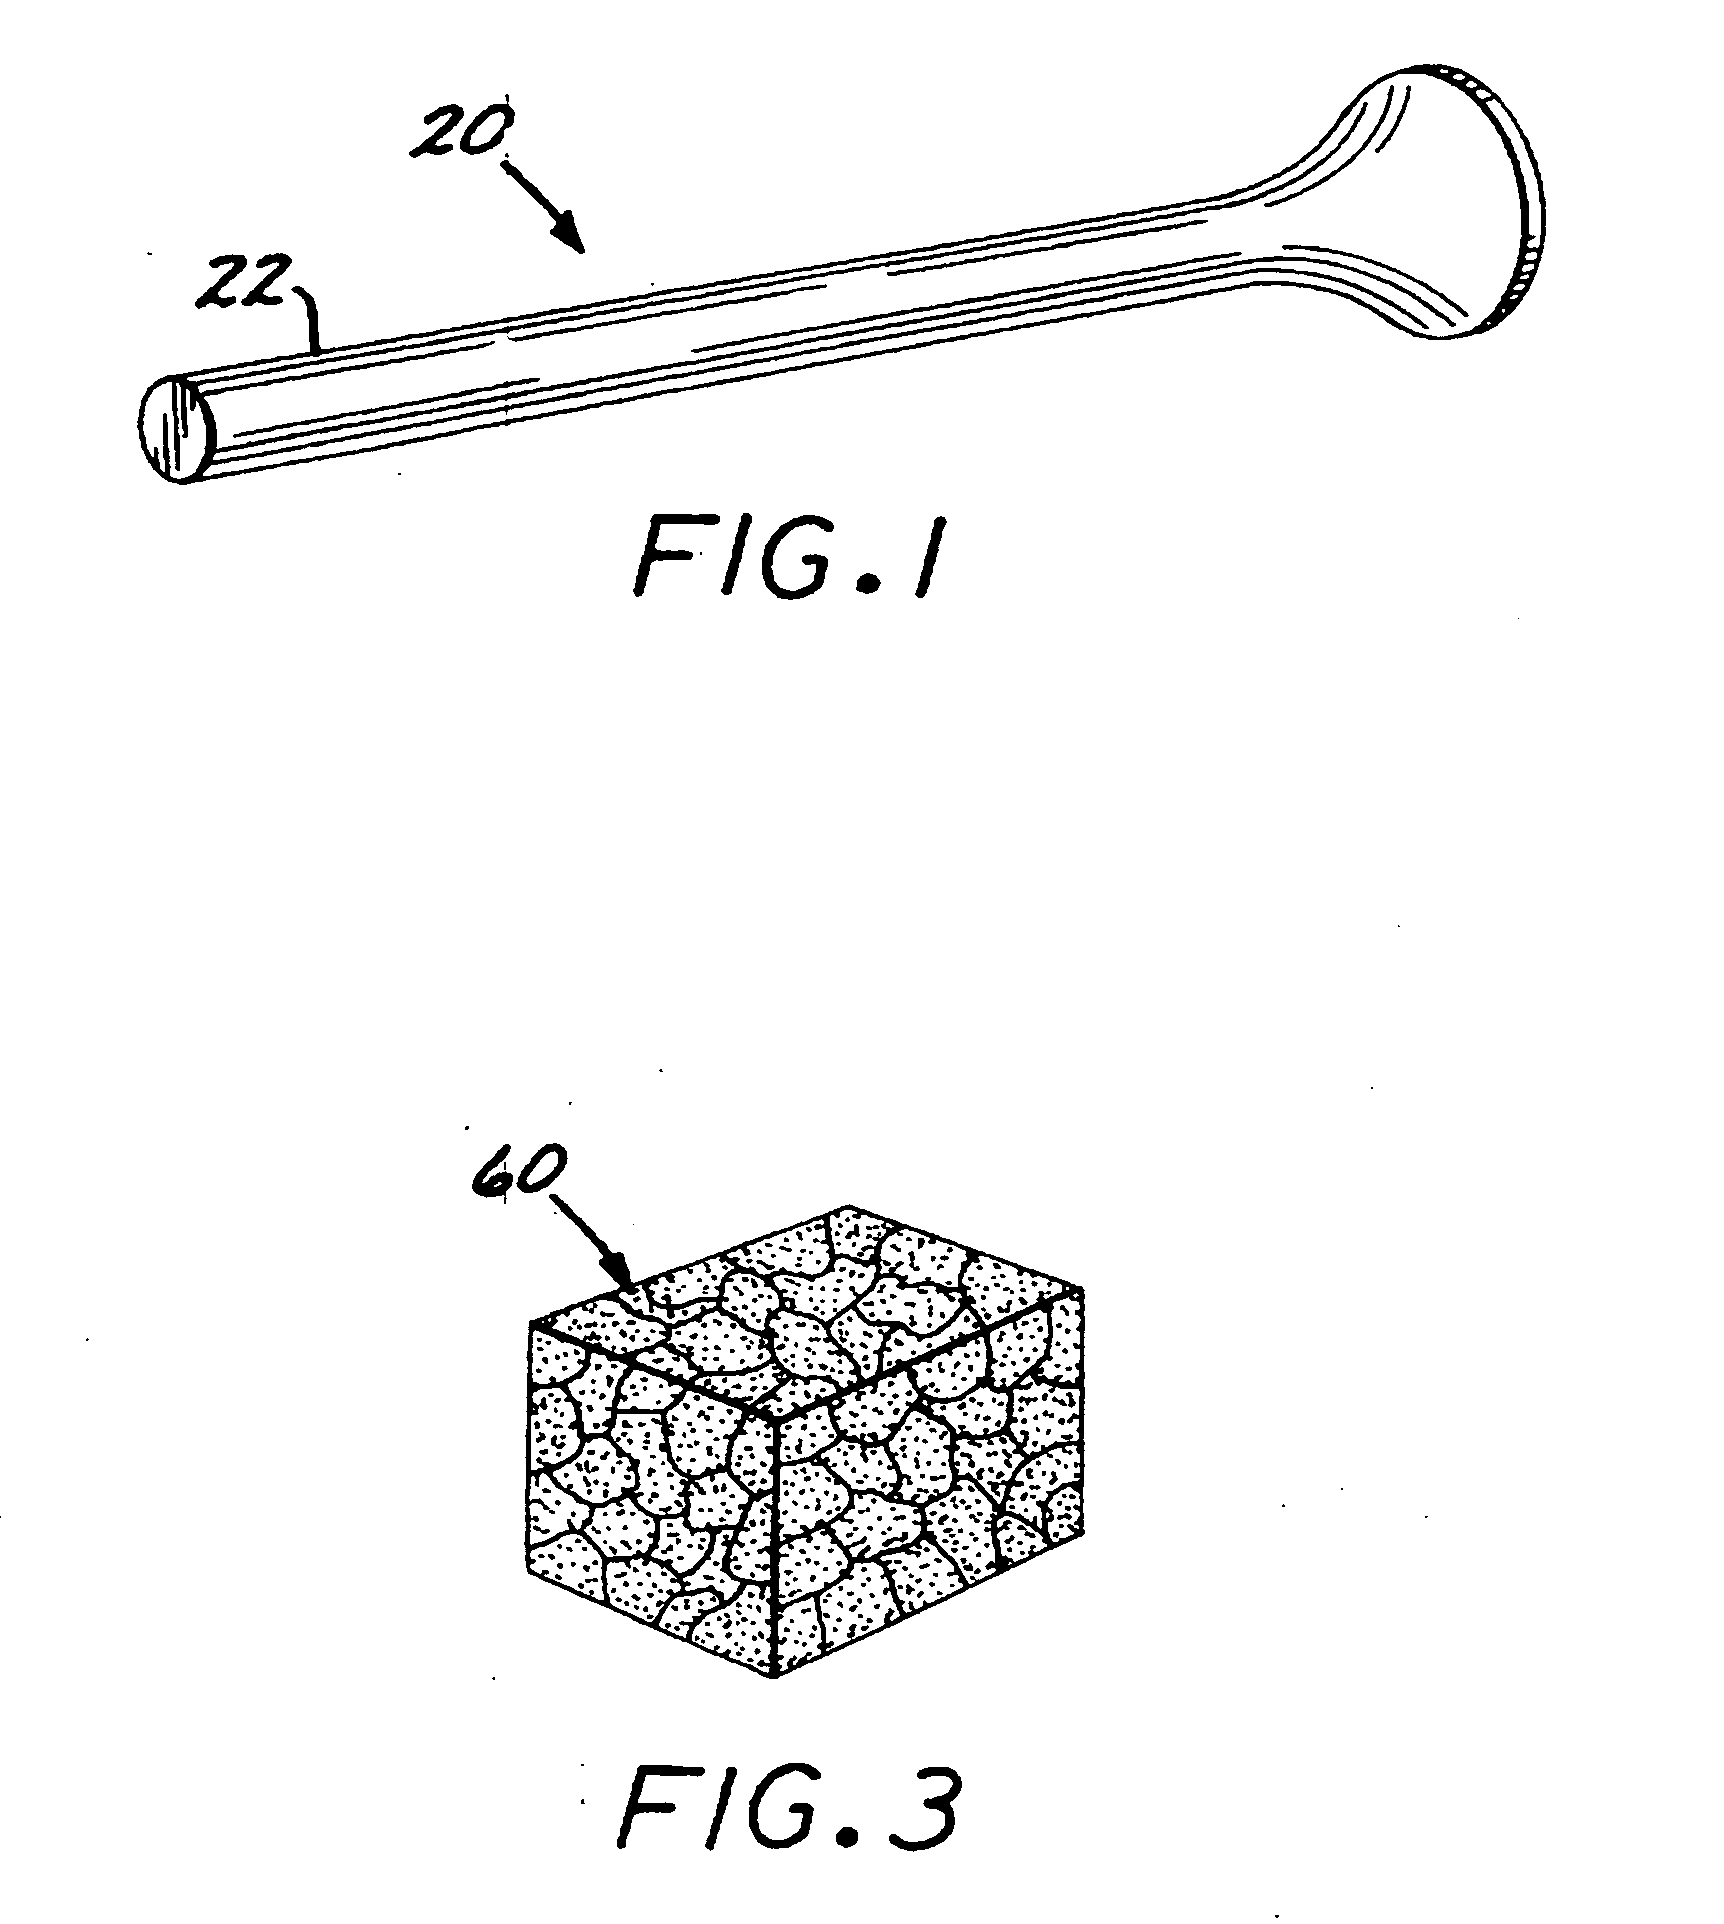 Meltless preparation of martensitic steel articles having thermophysically melt incompatible alloying elements